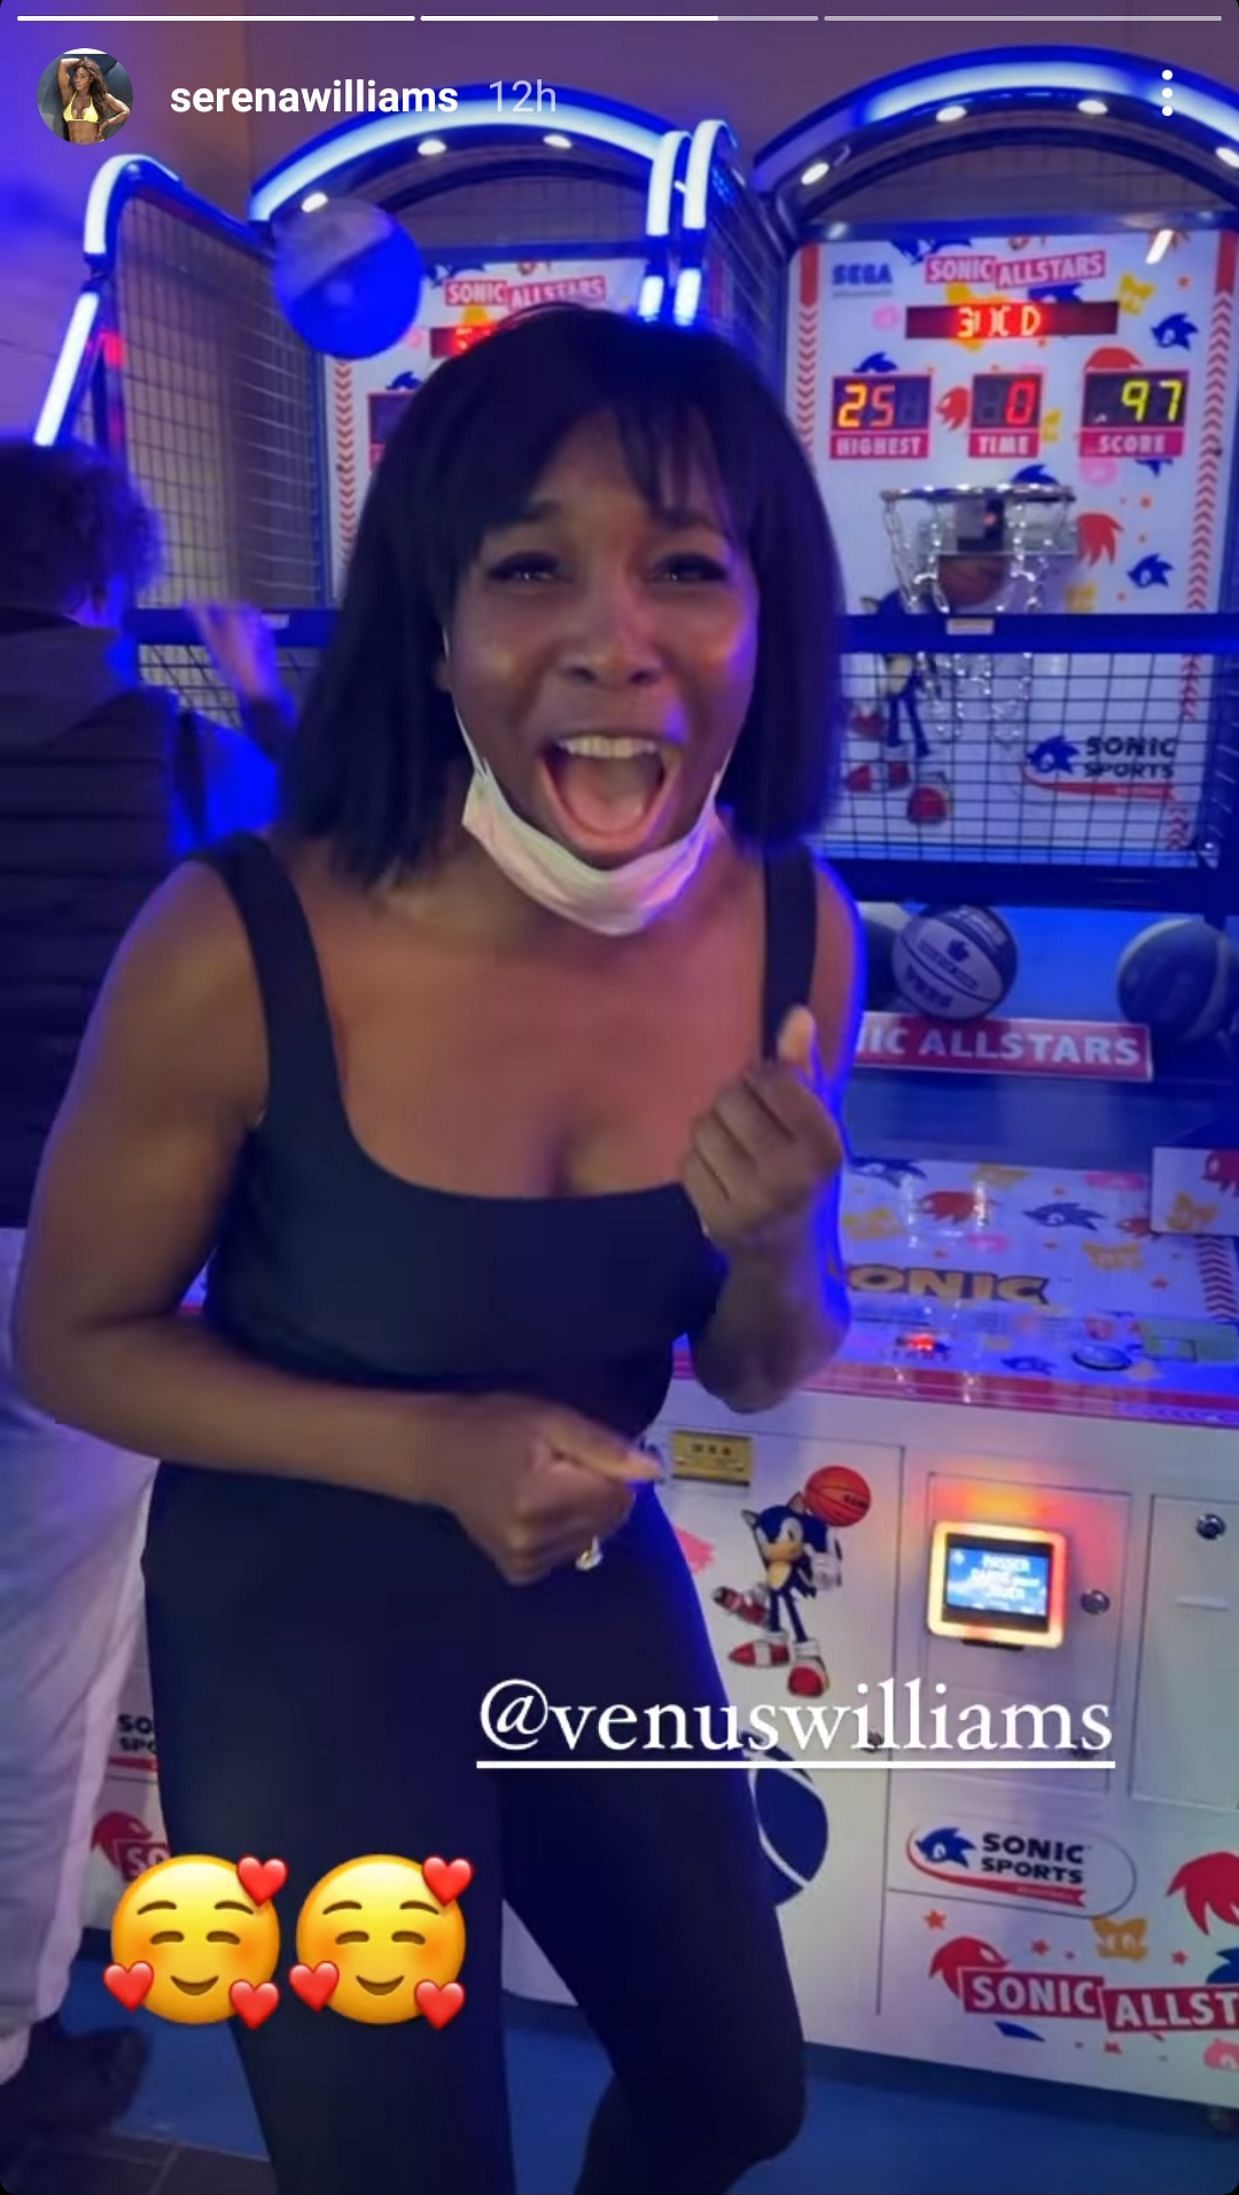 Venus rejoices after beating the previous highest score at the arcade